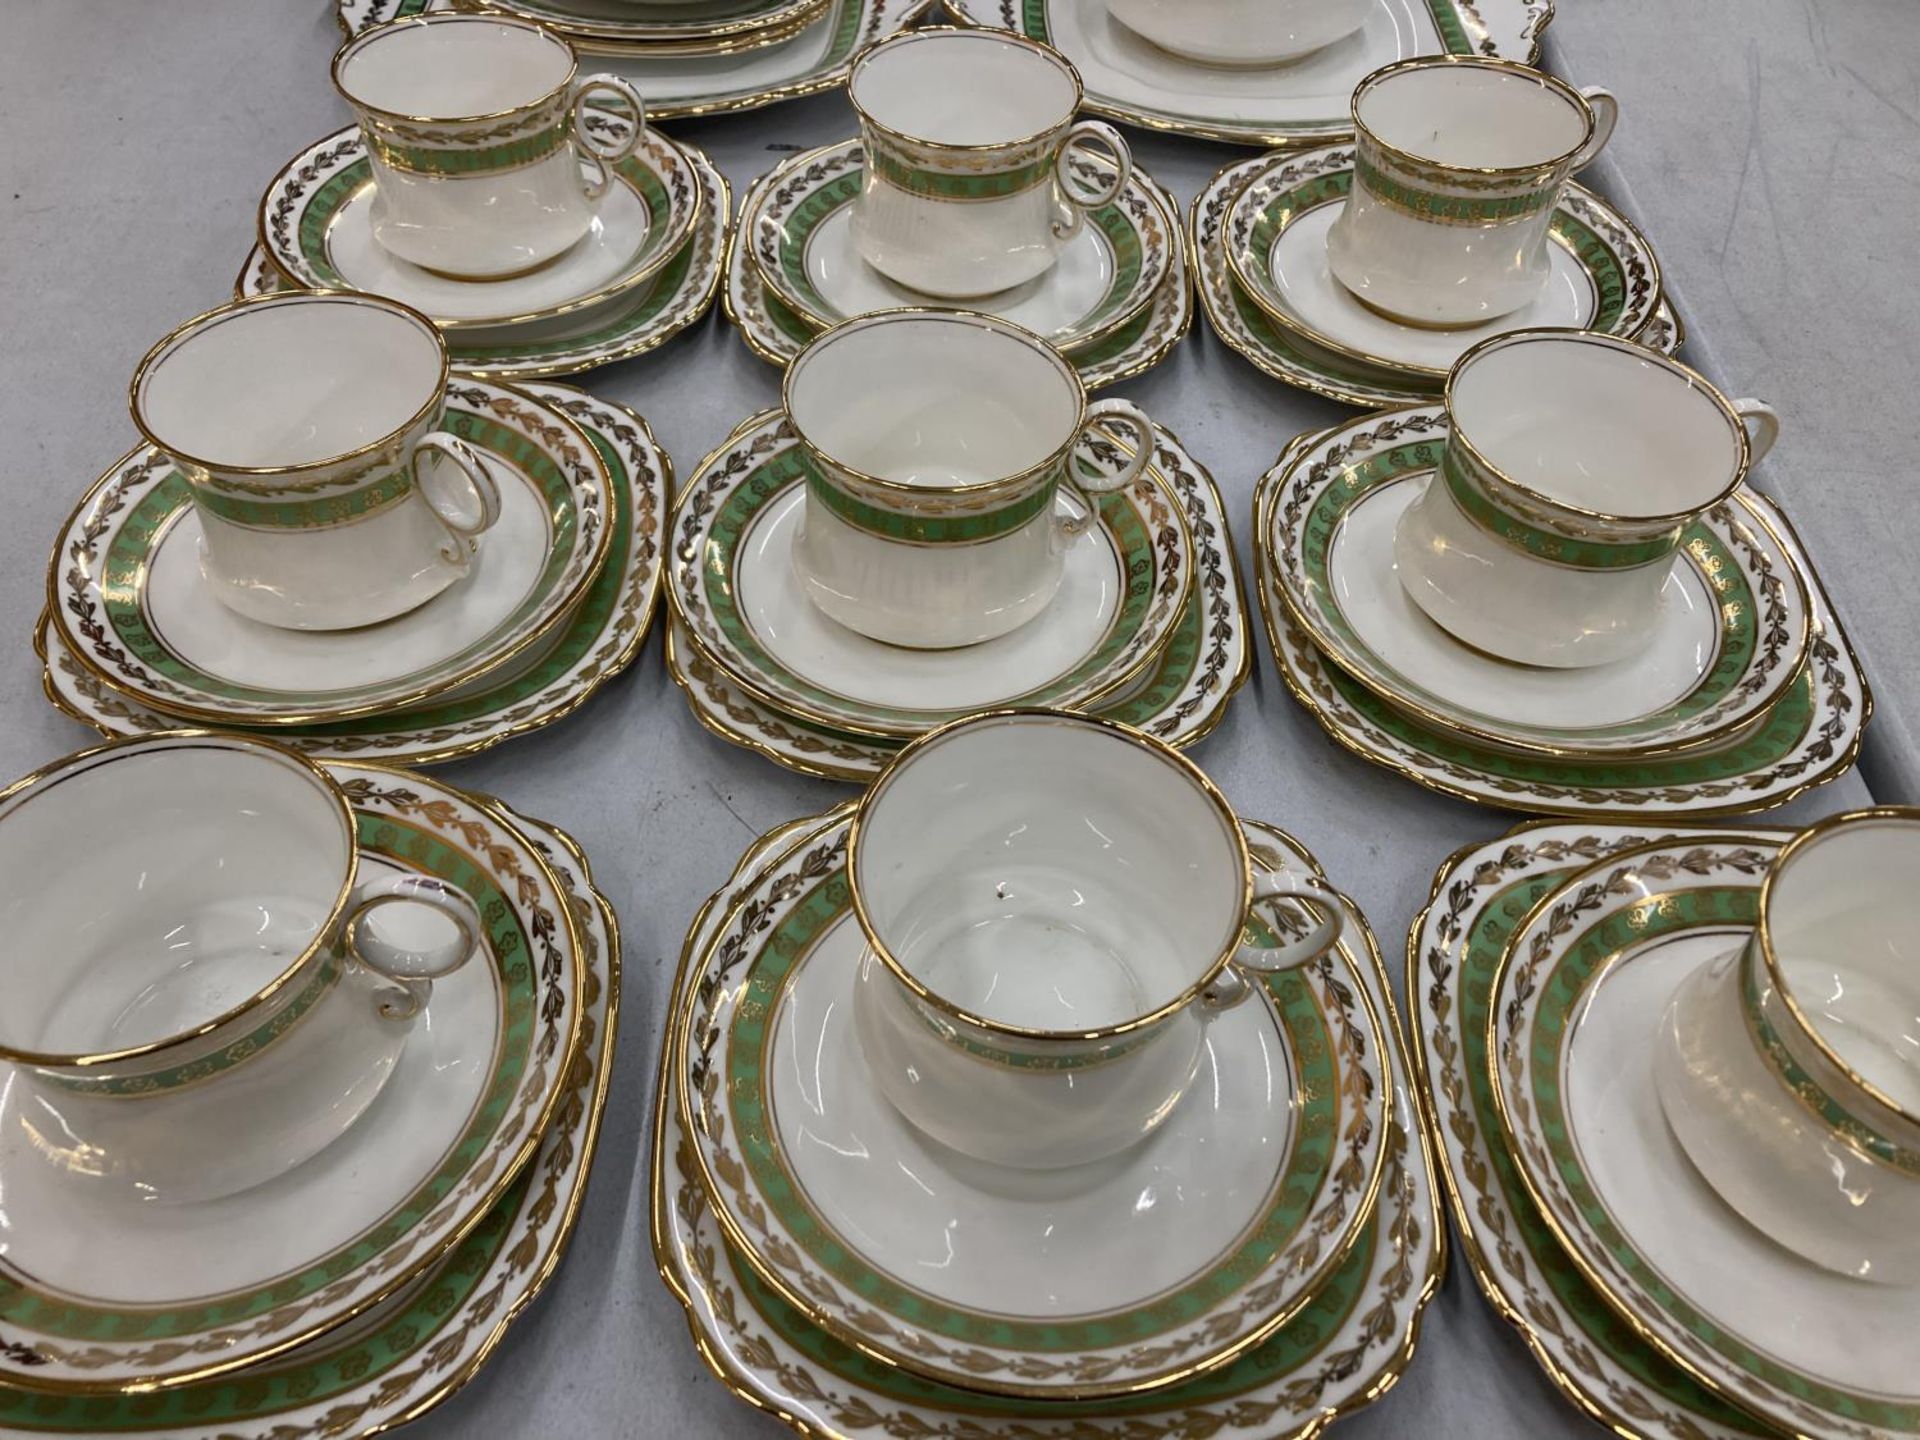 A VINTAGE ROYAL ALBERT PART CHINA TEASET TO INCLUDE CAKE PLATES, A SUGAR BOWL, CREAM JUGS, CUPS, - Image 3 of 4